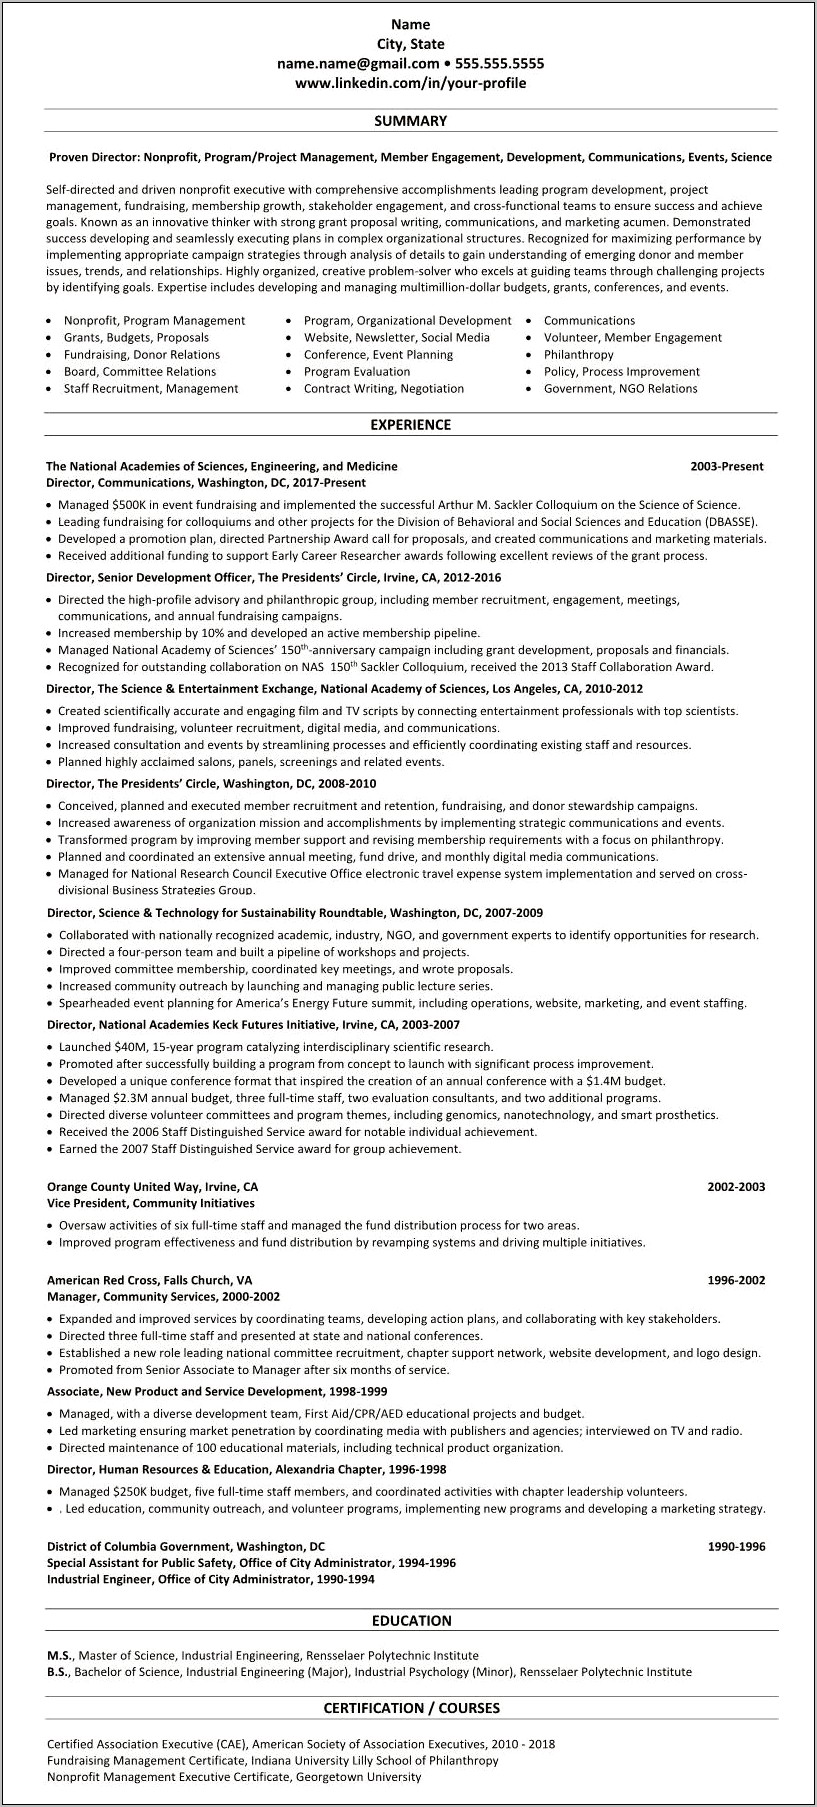 Resume Summary Examples For Fundraising